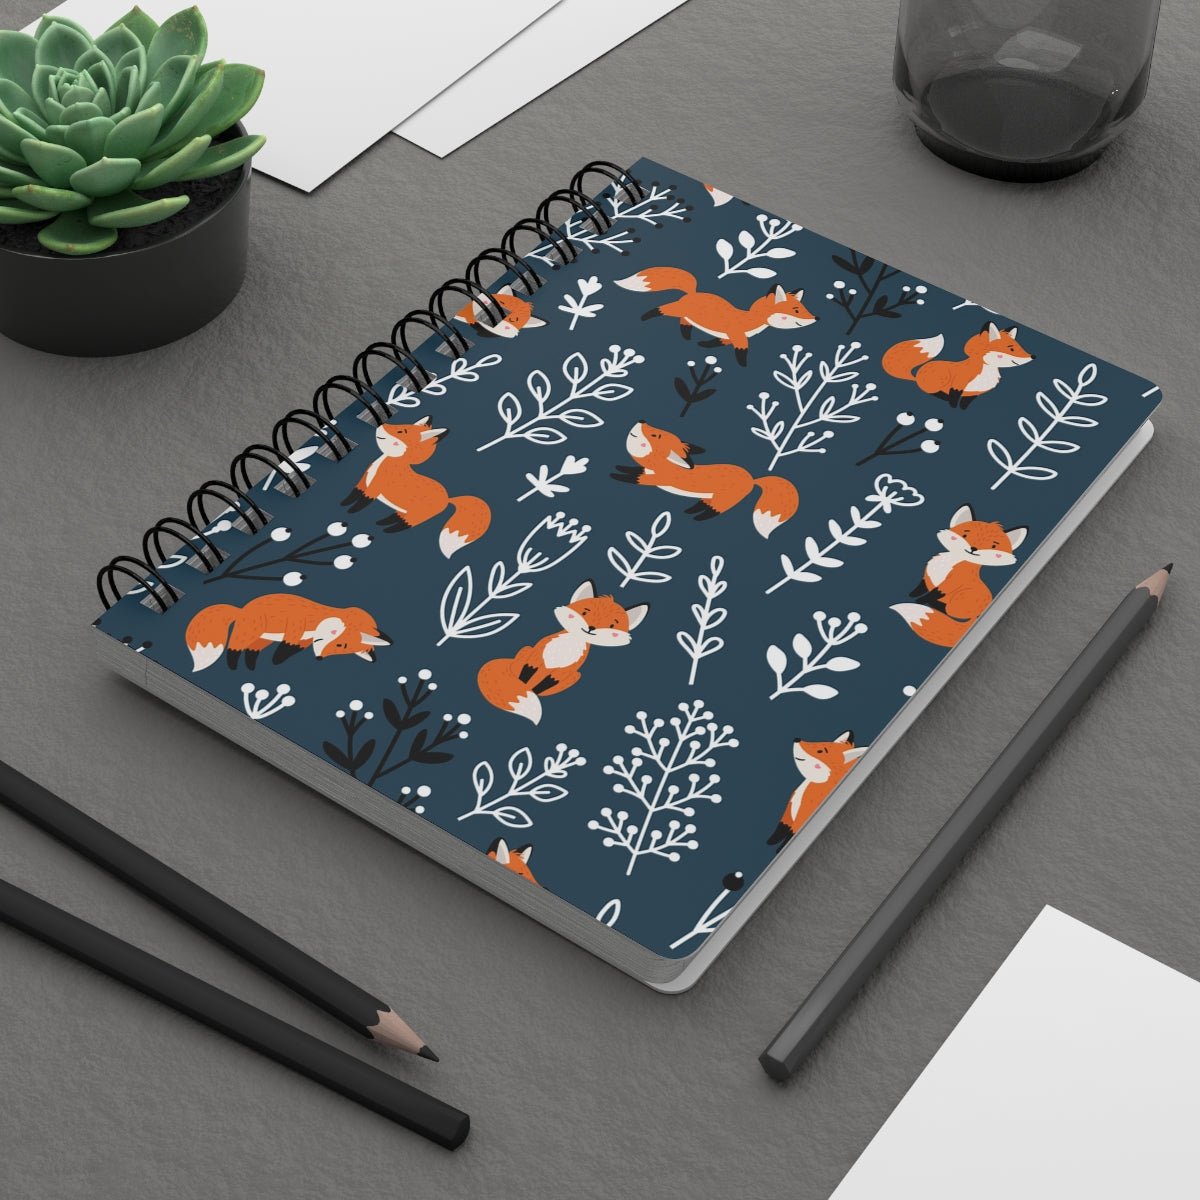 Happy Foxes Spiral Bound Journal - Puffin Lime